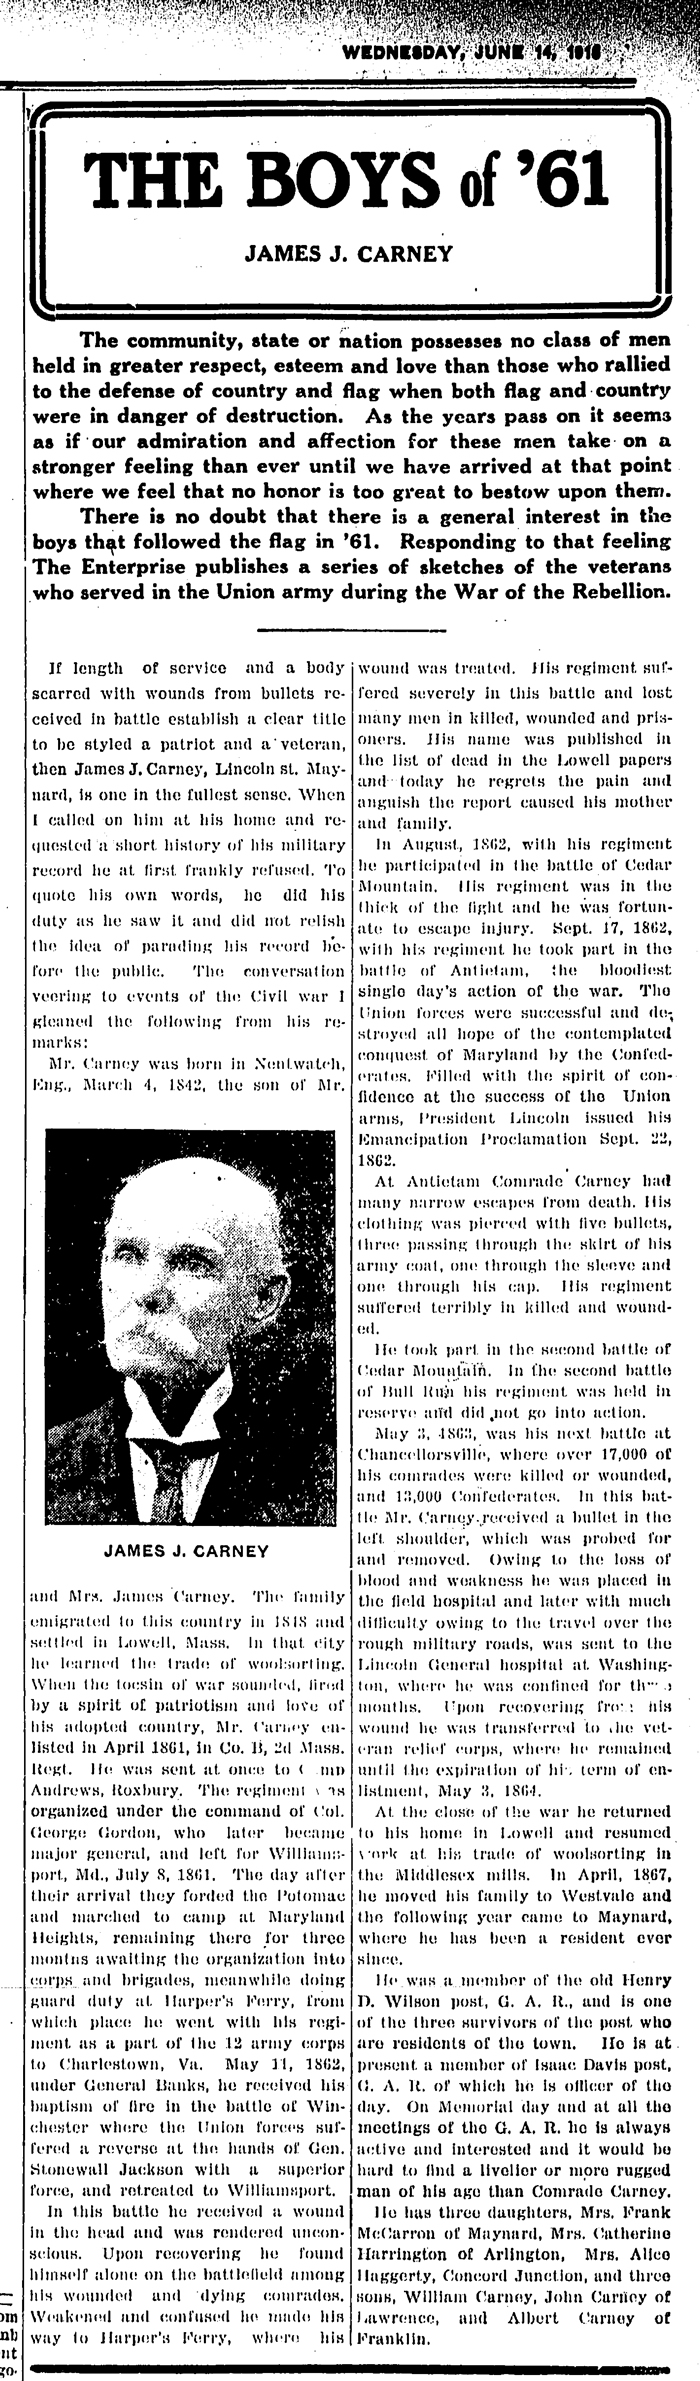 Clipping from the Acton Enterprise, June 14, 1916